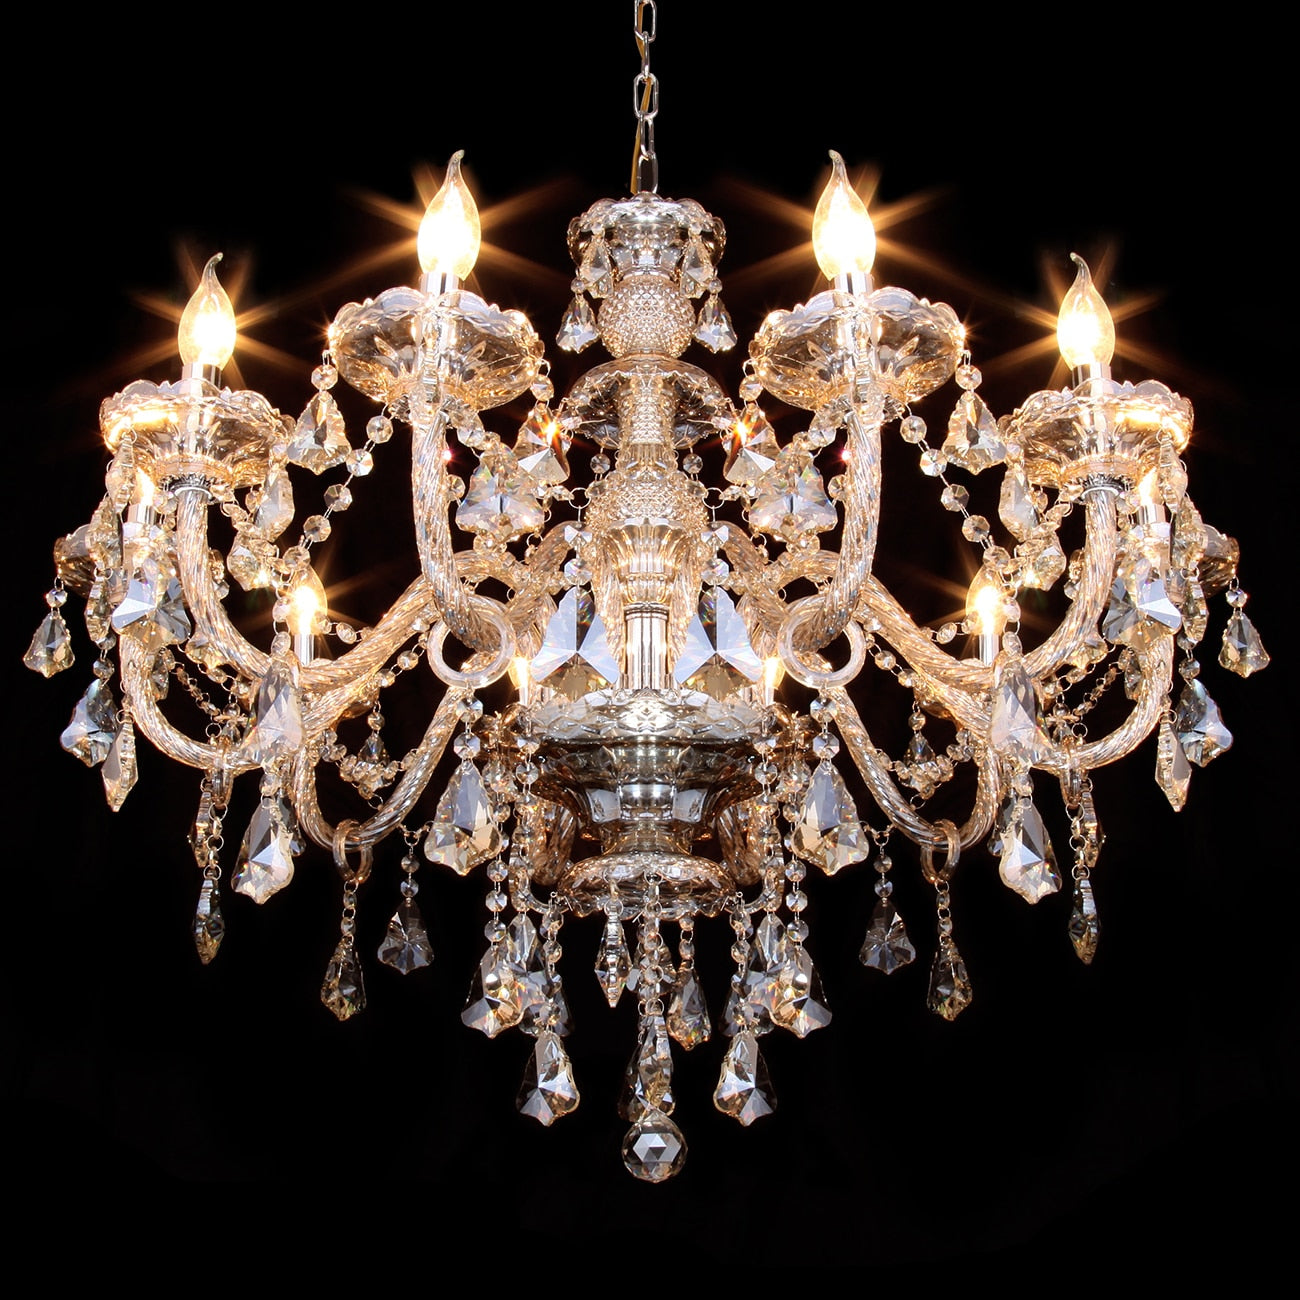 "The Entertainer" - Luxury Crystal Chandelier